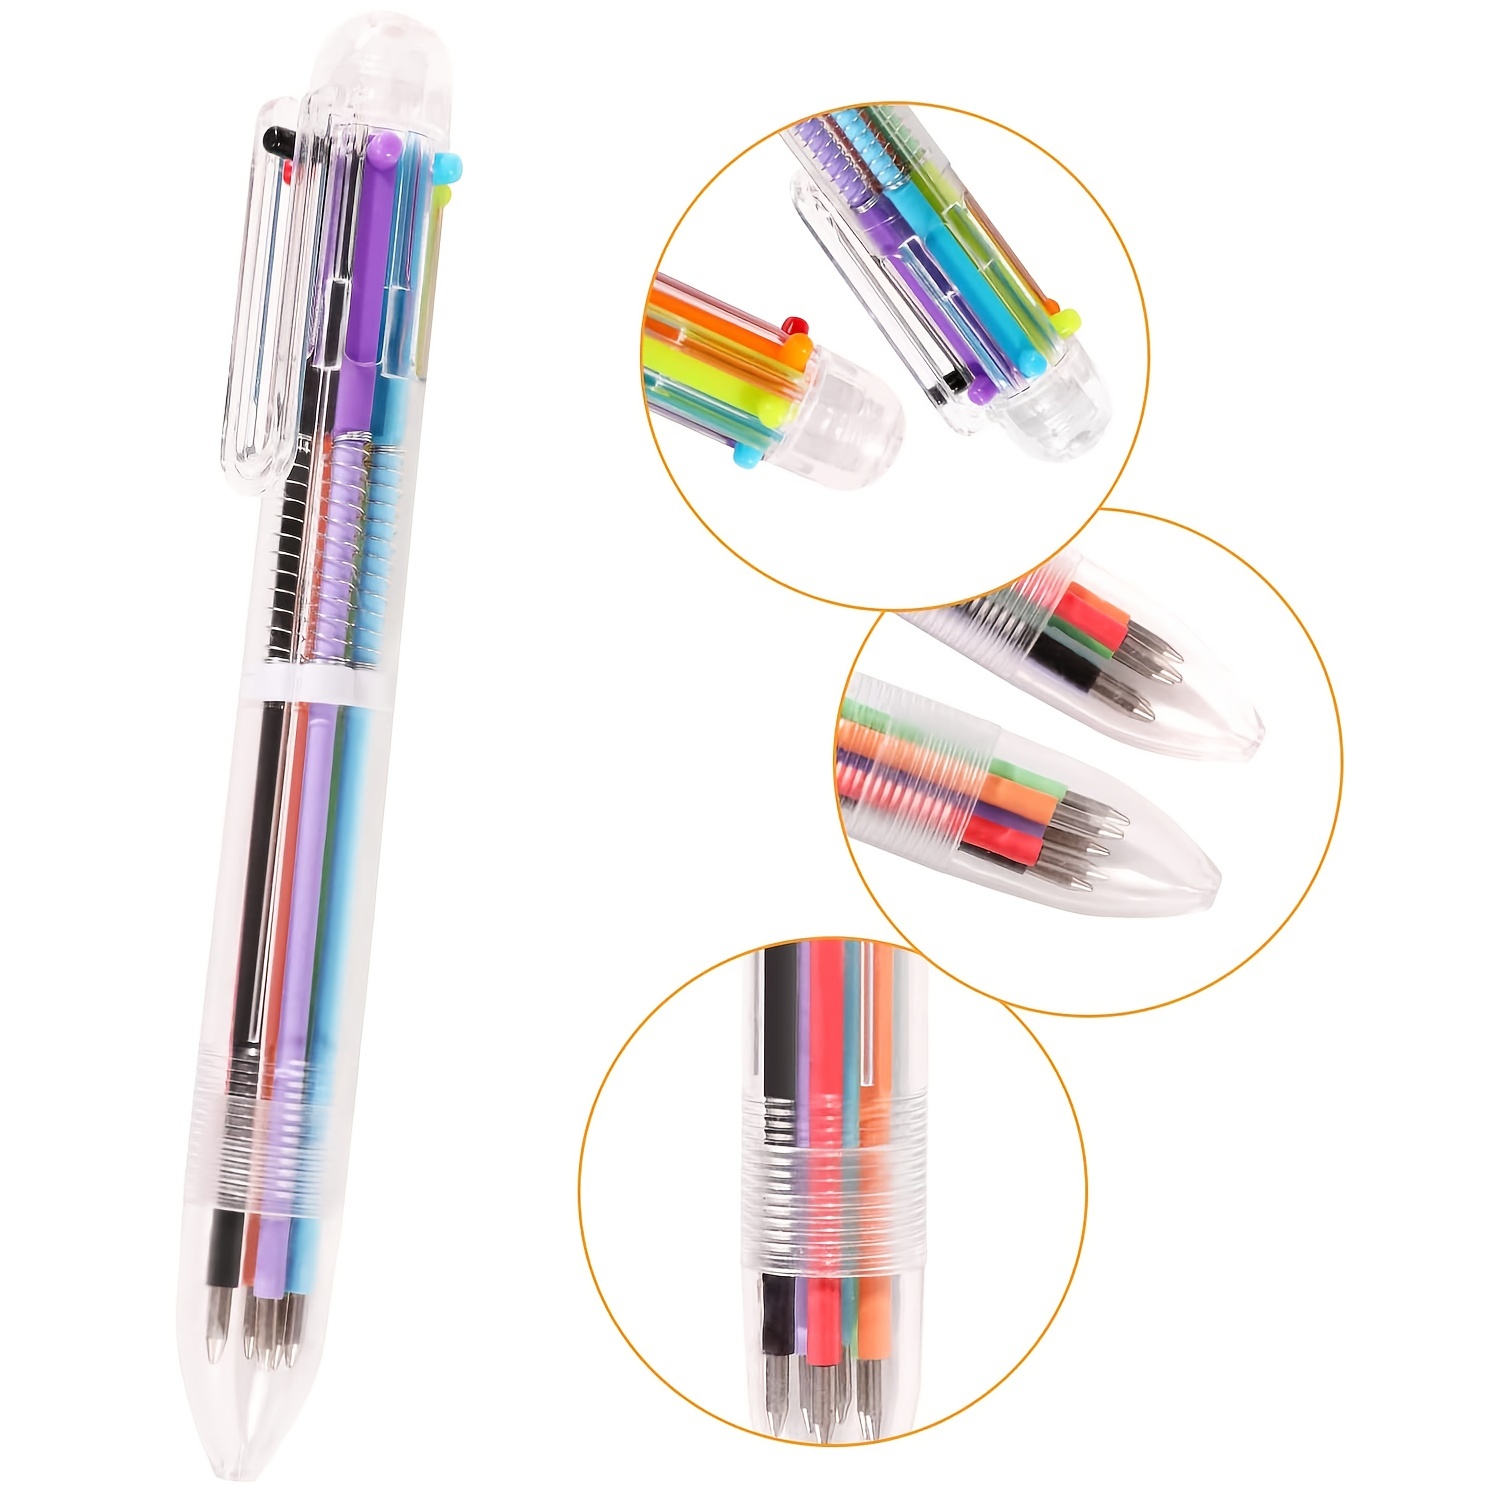 Fun Pens for Kids, Multi-color Ballpoint Pen 6-in-1, Party Favors  Transparent Barrel Ballpoint Pen 6-Color 0.5mm for Office School Supplies  Students Children Gift